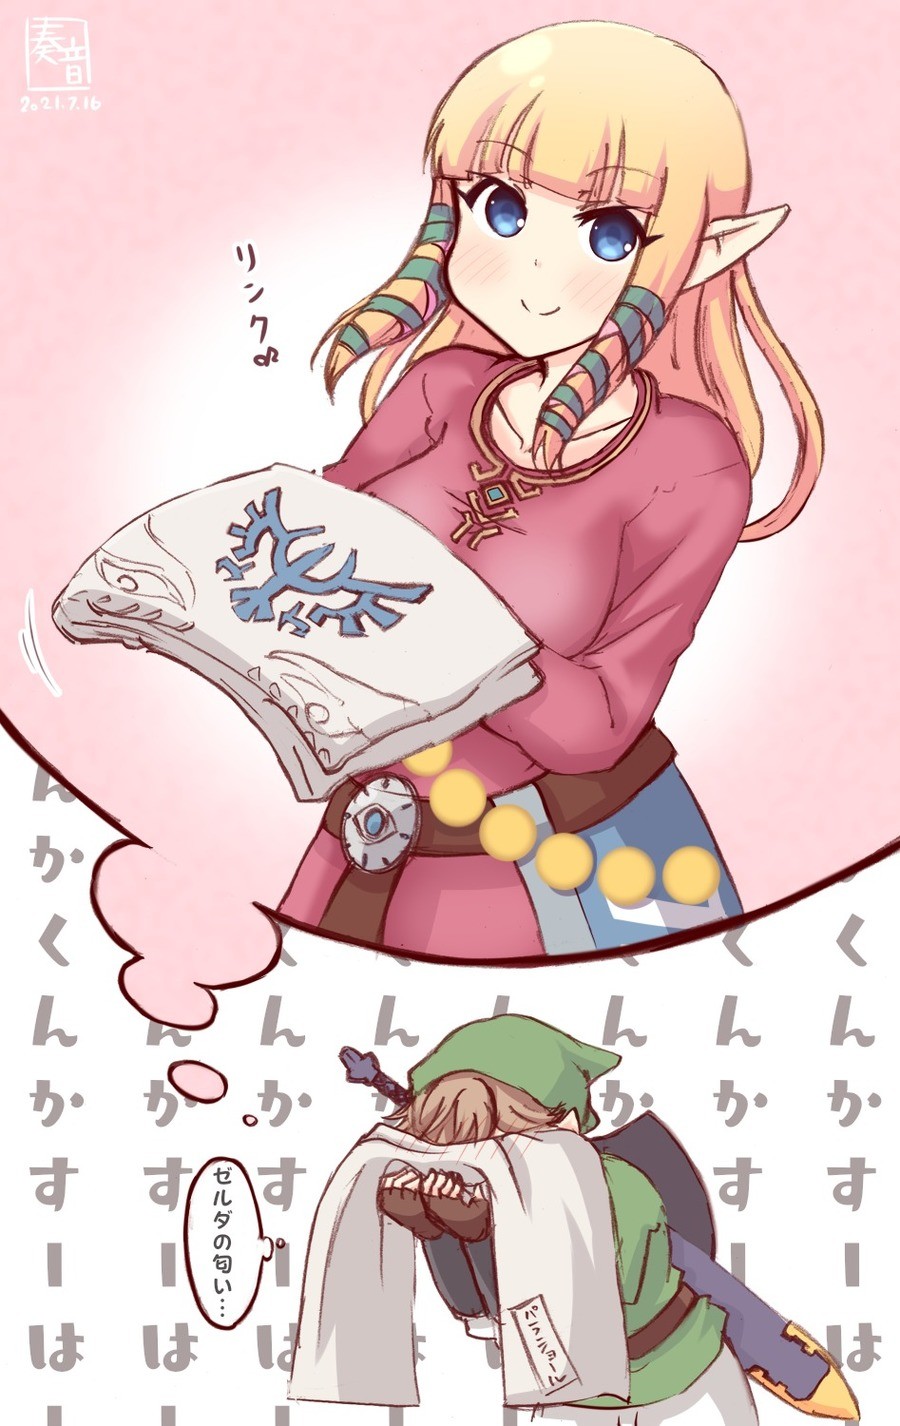 Daily Zelda - 1060: Big Sniff. join list: DailyZelda (524 subs)Mention History Source: .. lewdsalt link is being cute